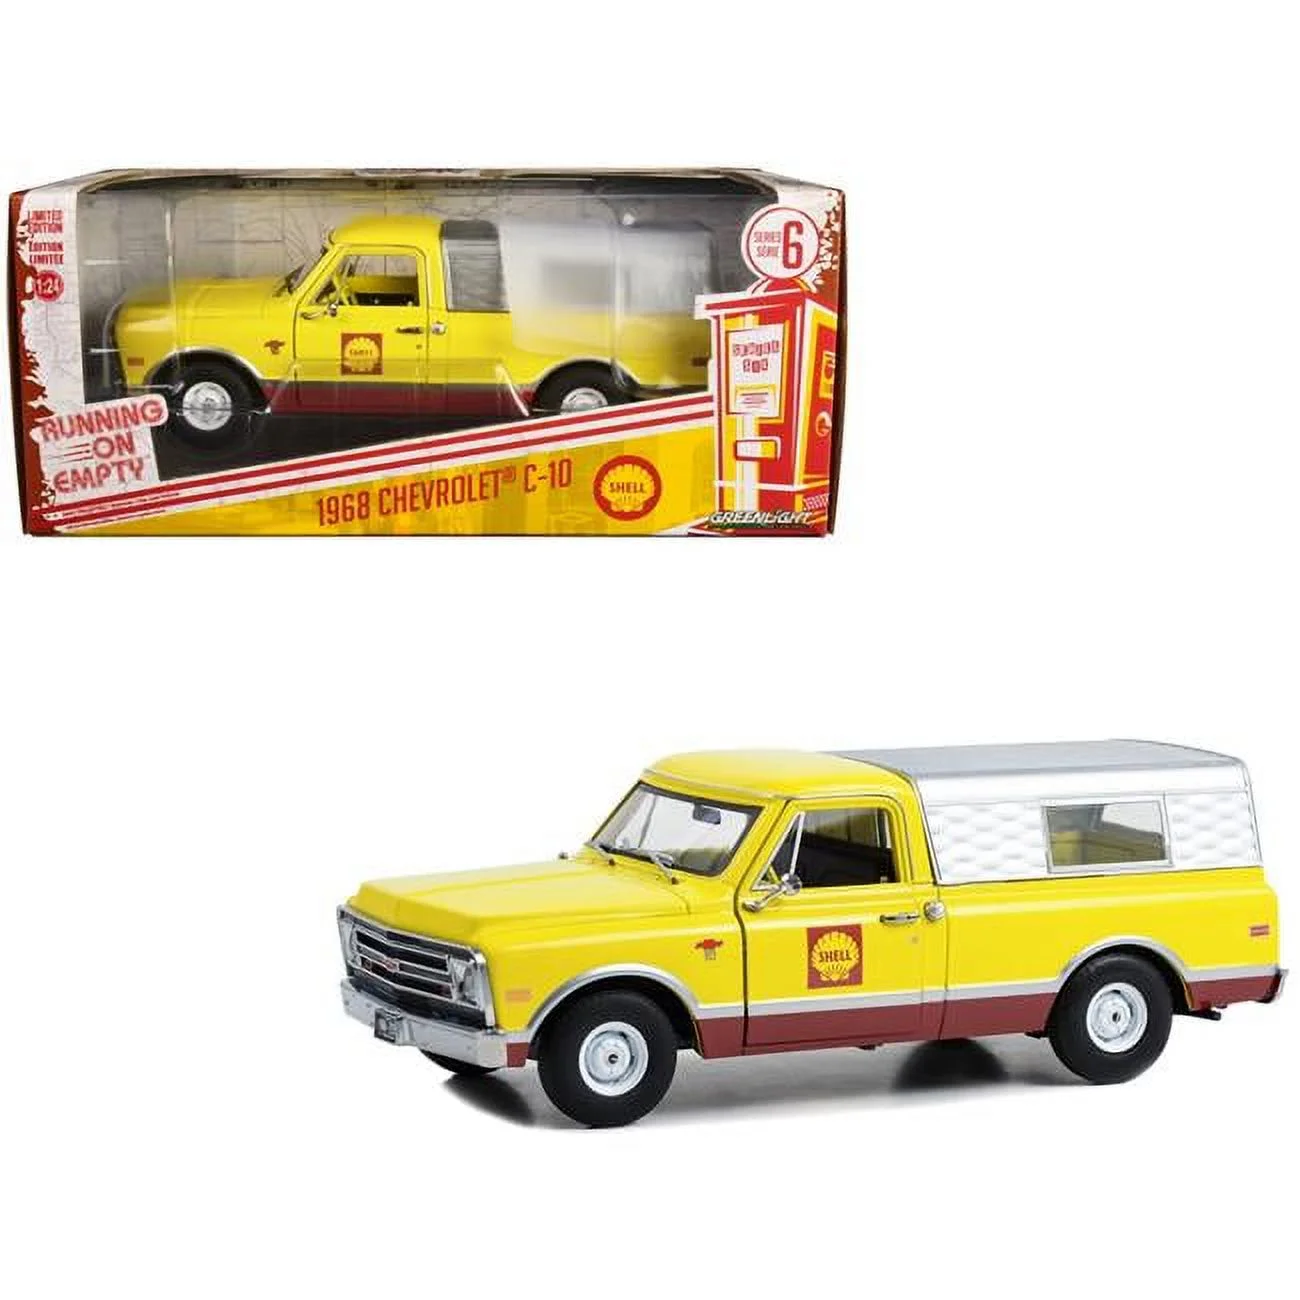 Greenlight 1/24 Running on Empty Series 6- 1968 Chevrolet C-10 with Camper Shell - Shell Oil 85070-B